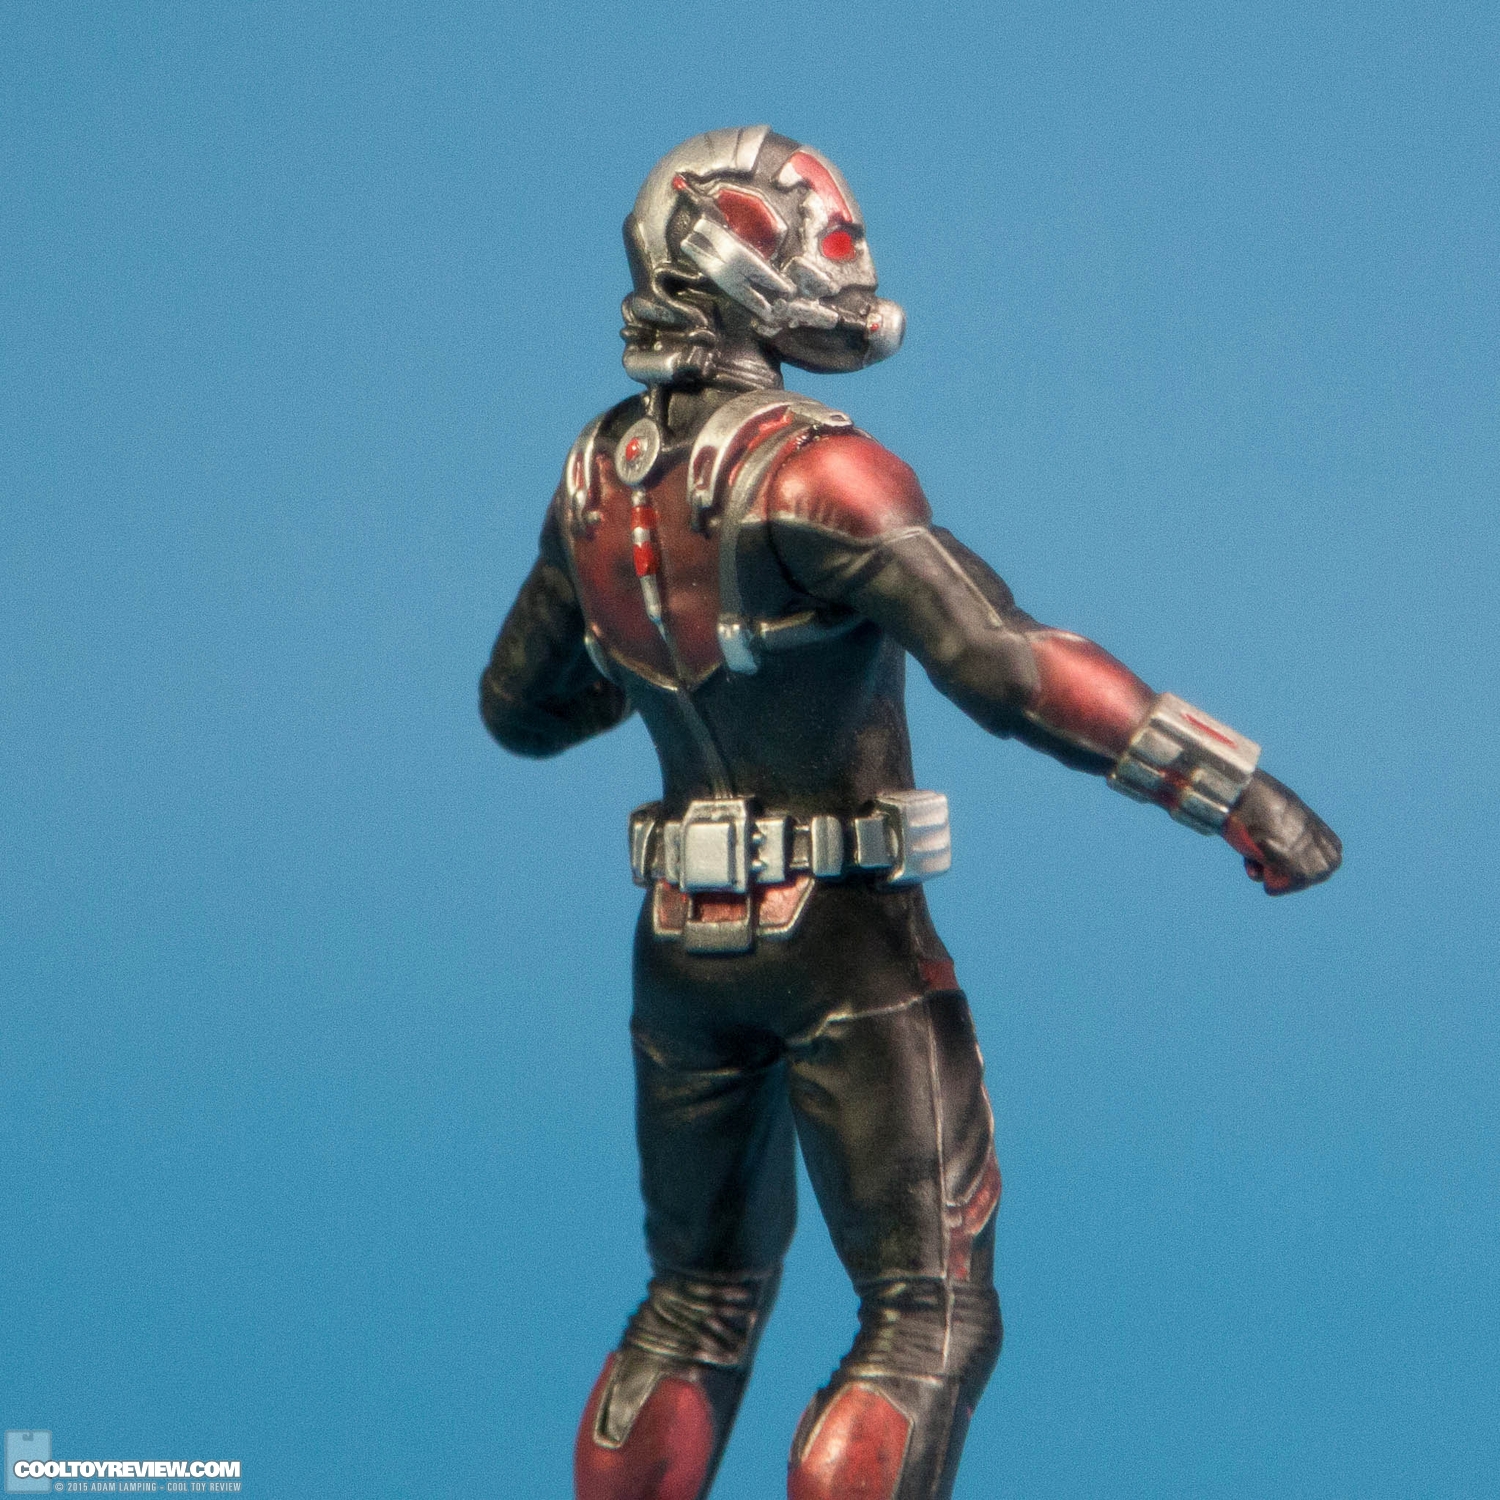 gentle-giant-ant-man-statue-2015-convention-exclusive-006.jpg